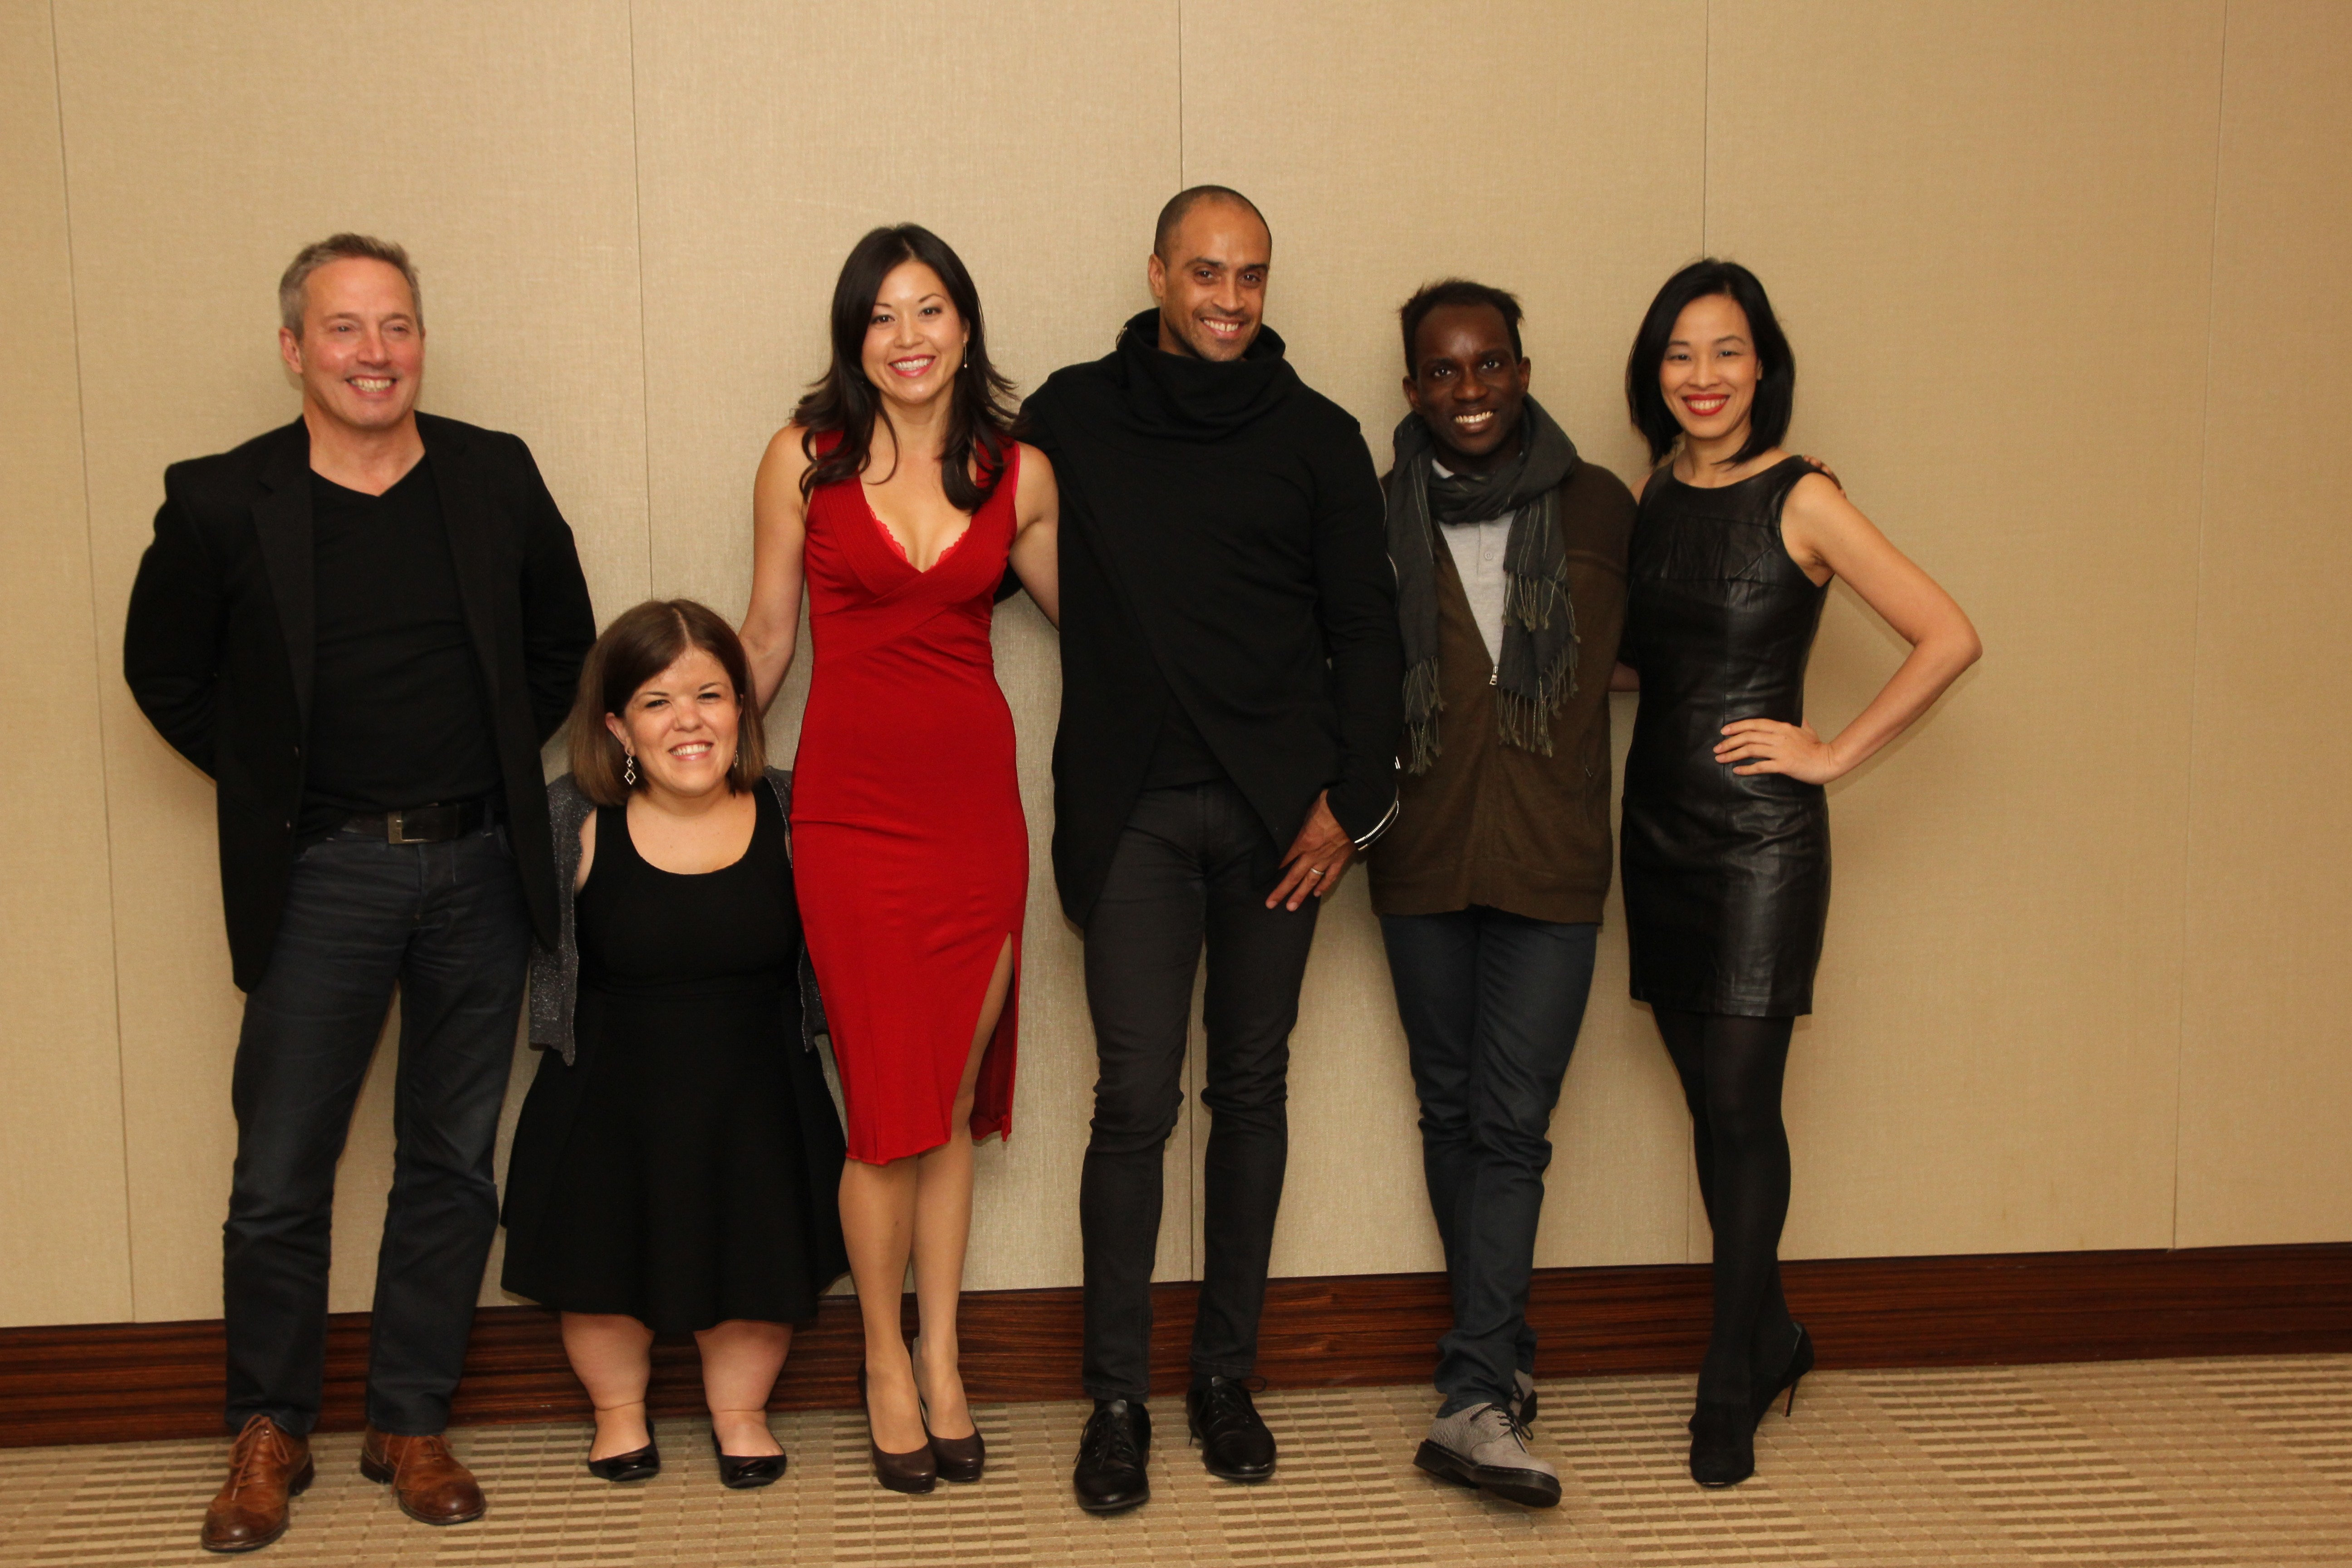 Rick Guidotti, Becky Curran, Jennifer Betit Yen, Blue Michael, Daryl King and Lia Chang attend a special screening of 72 Hour Shootout films and panel discussion at the Time Warner Theater in New York on October 7, 2015. Photo by Lil Rhee